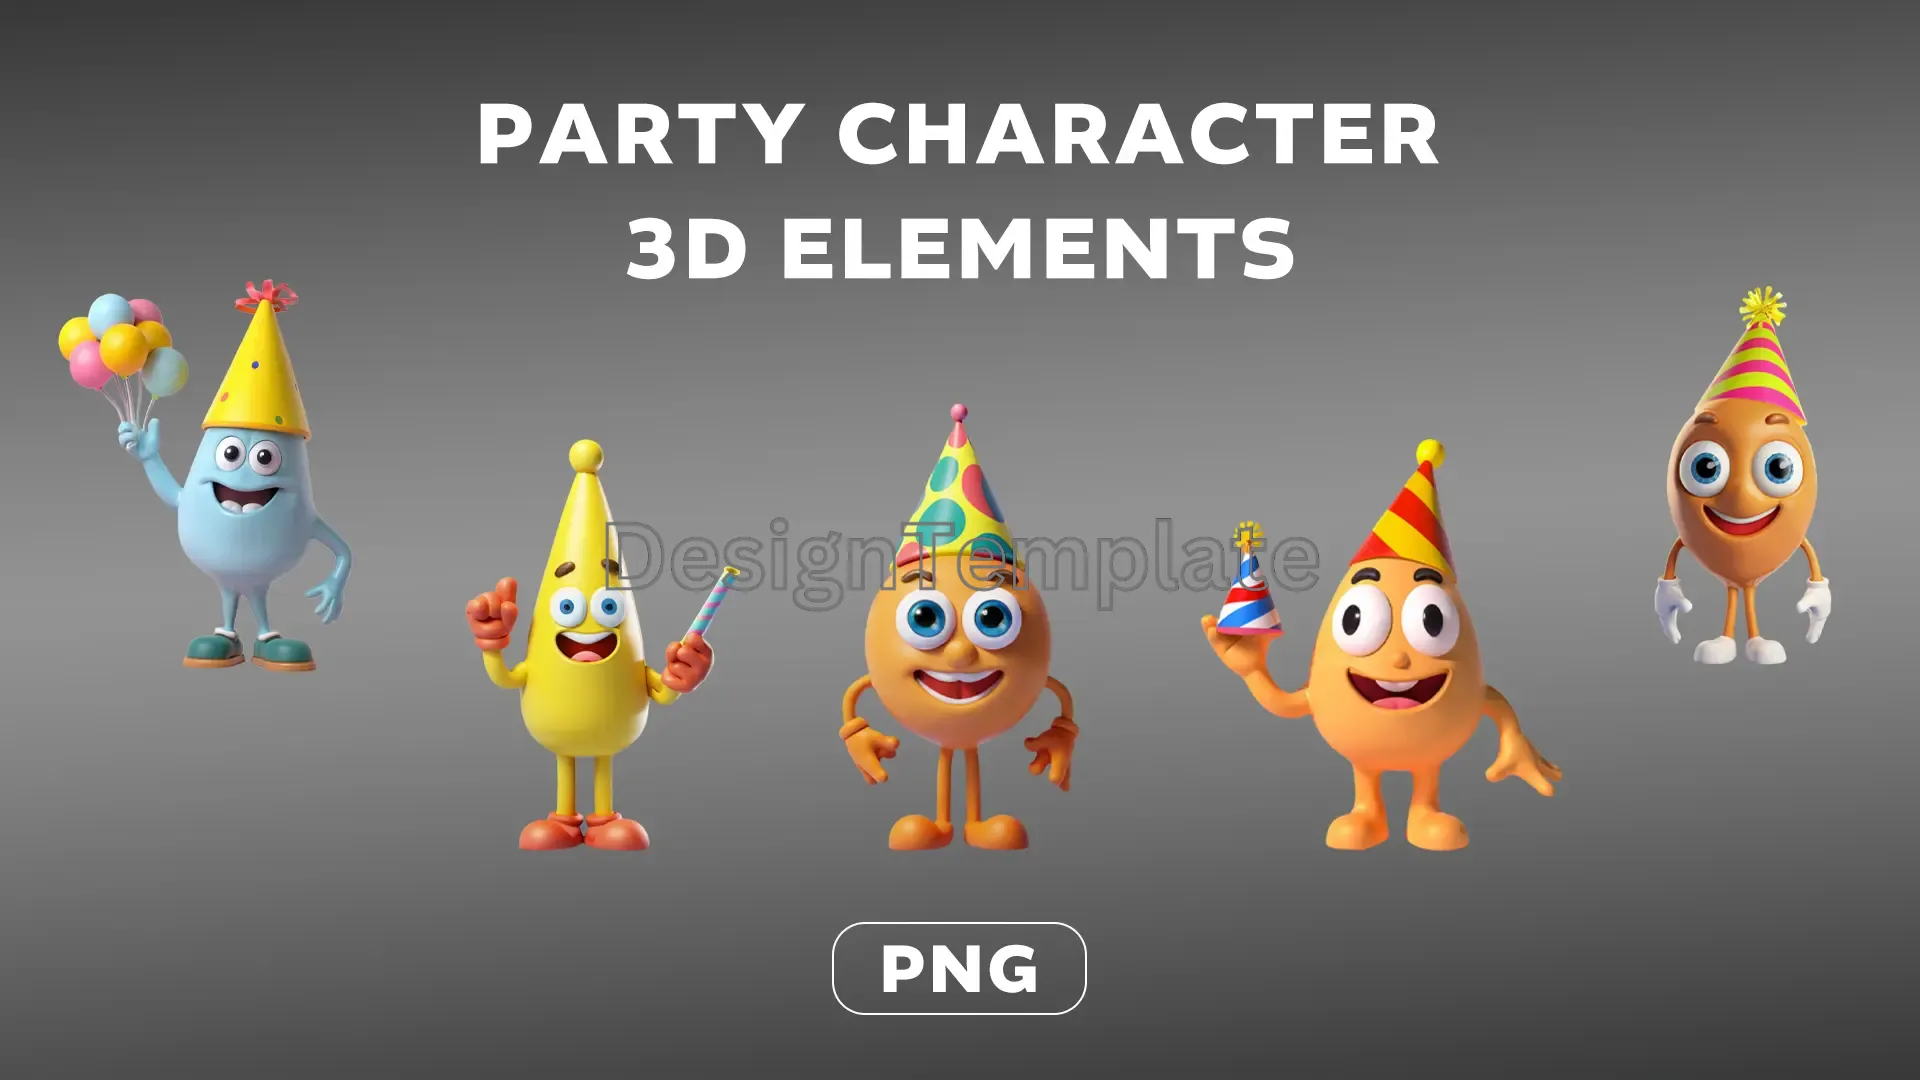 Festive Figures Party Character 3D Elements Collection